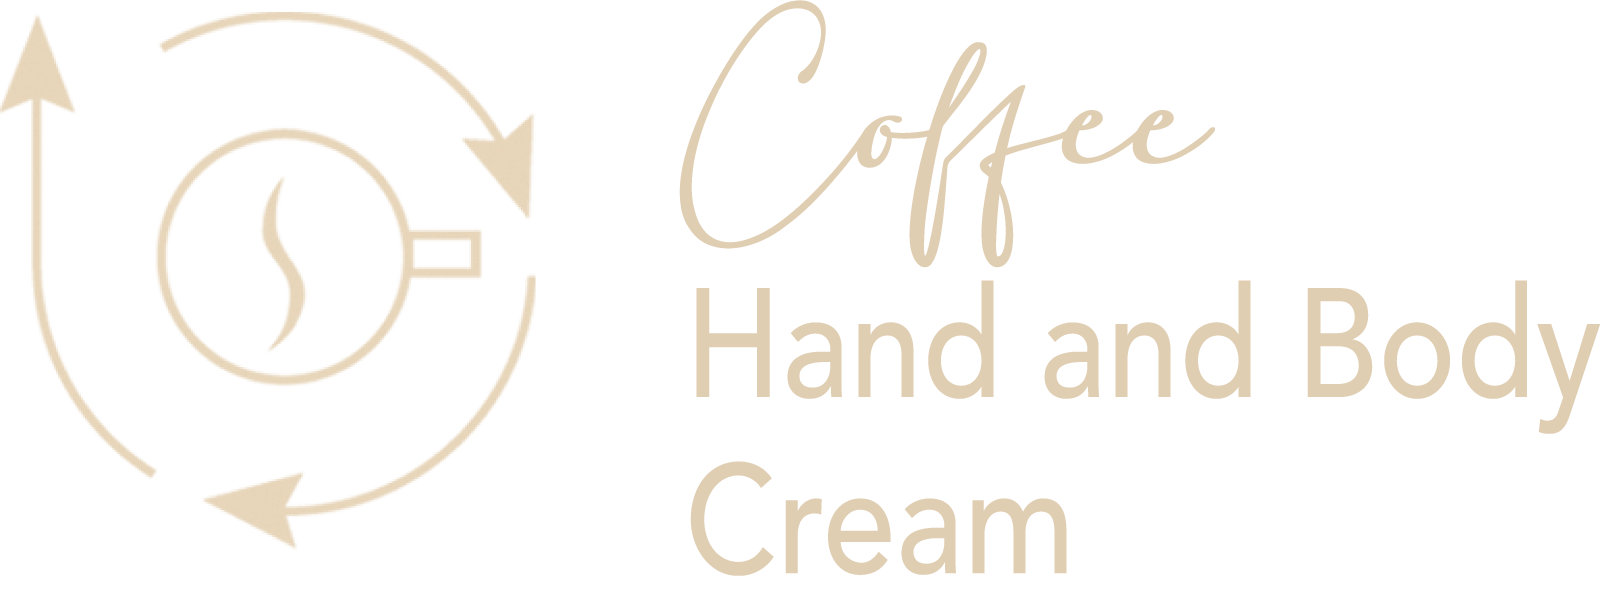 UpperBe - Upcycled beauty selection - Coffee hand and body cream